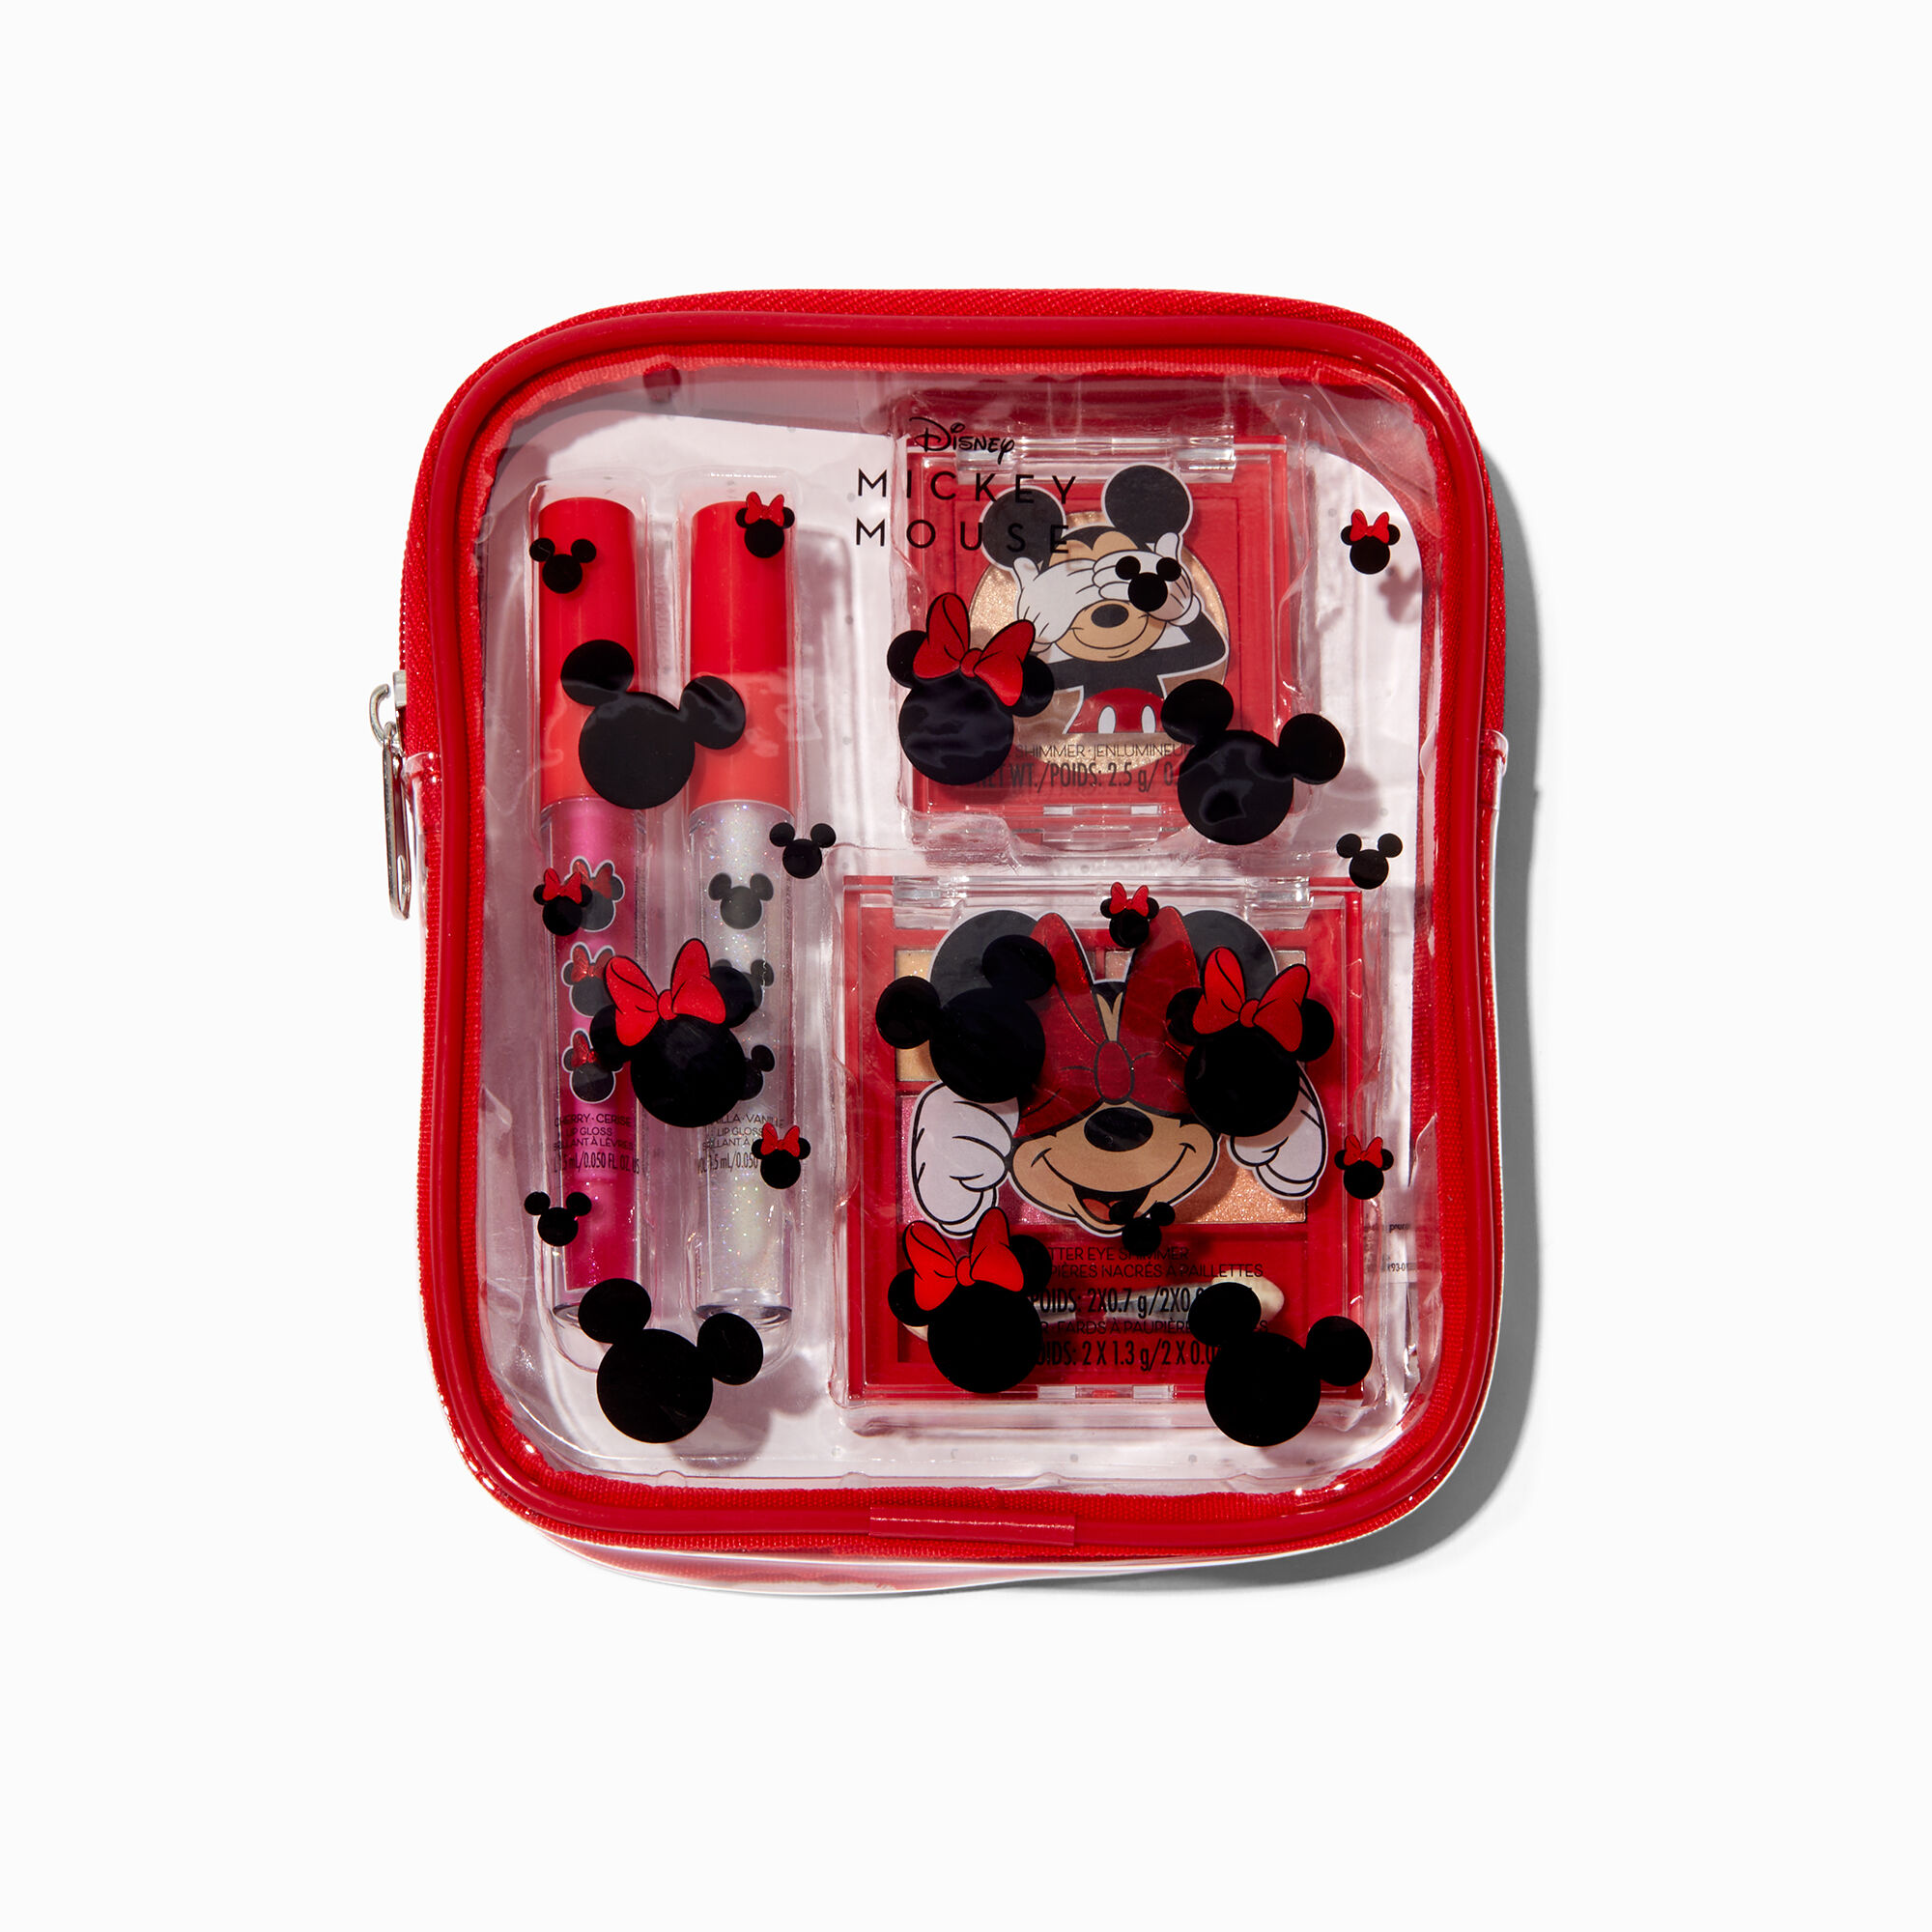 View Claires Disney 100 Mickey Mouse Makeup Set information